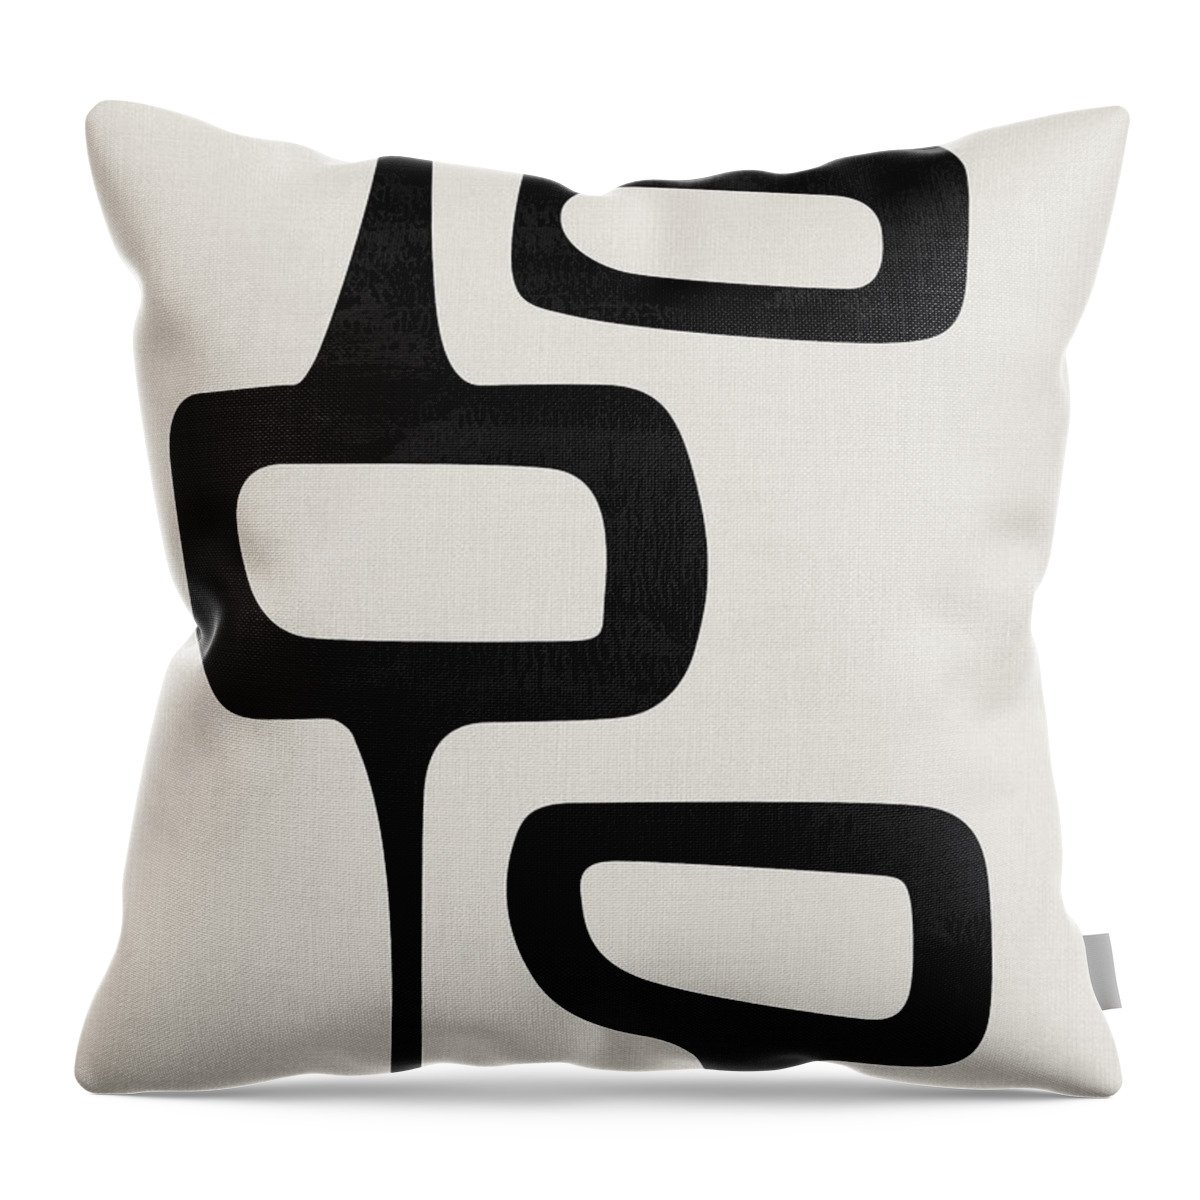 Black And White Throw Pillow featuring the mixed media Mid Century Abstract Shapes V by Naxart Studio